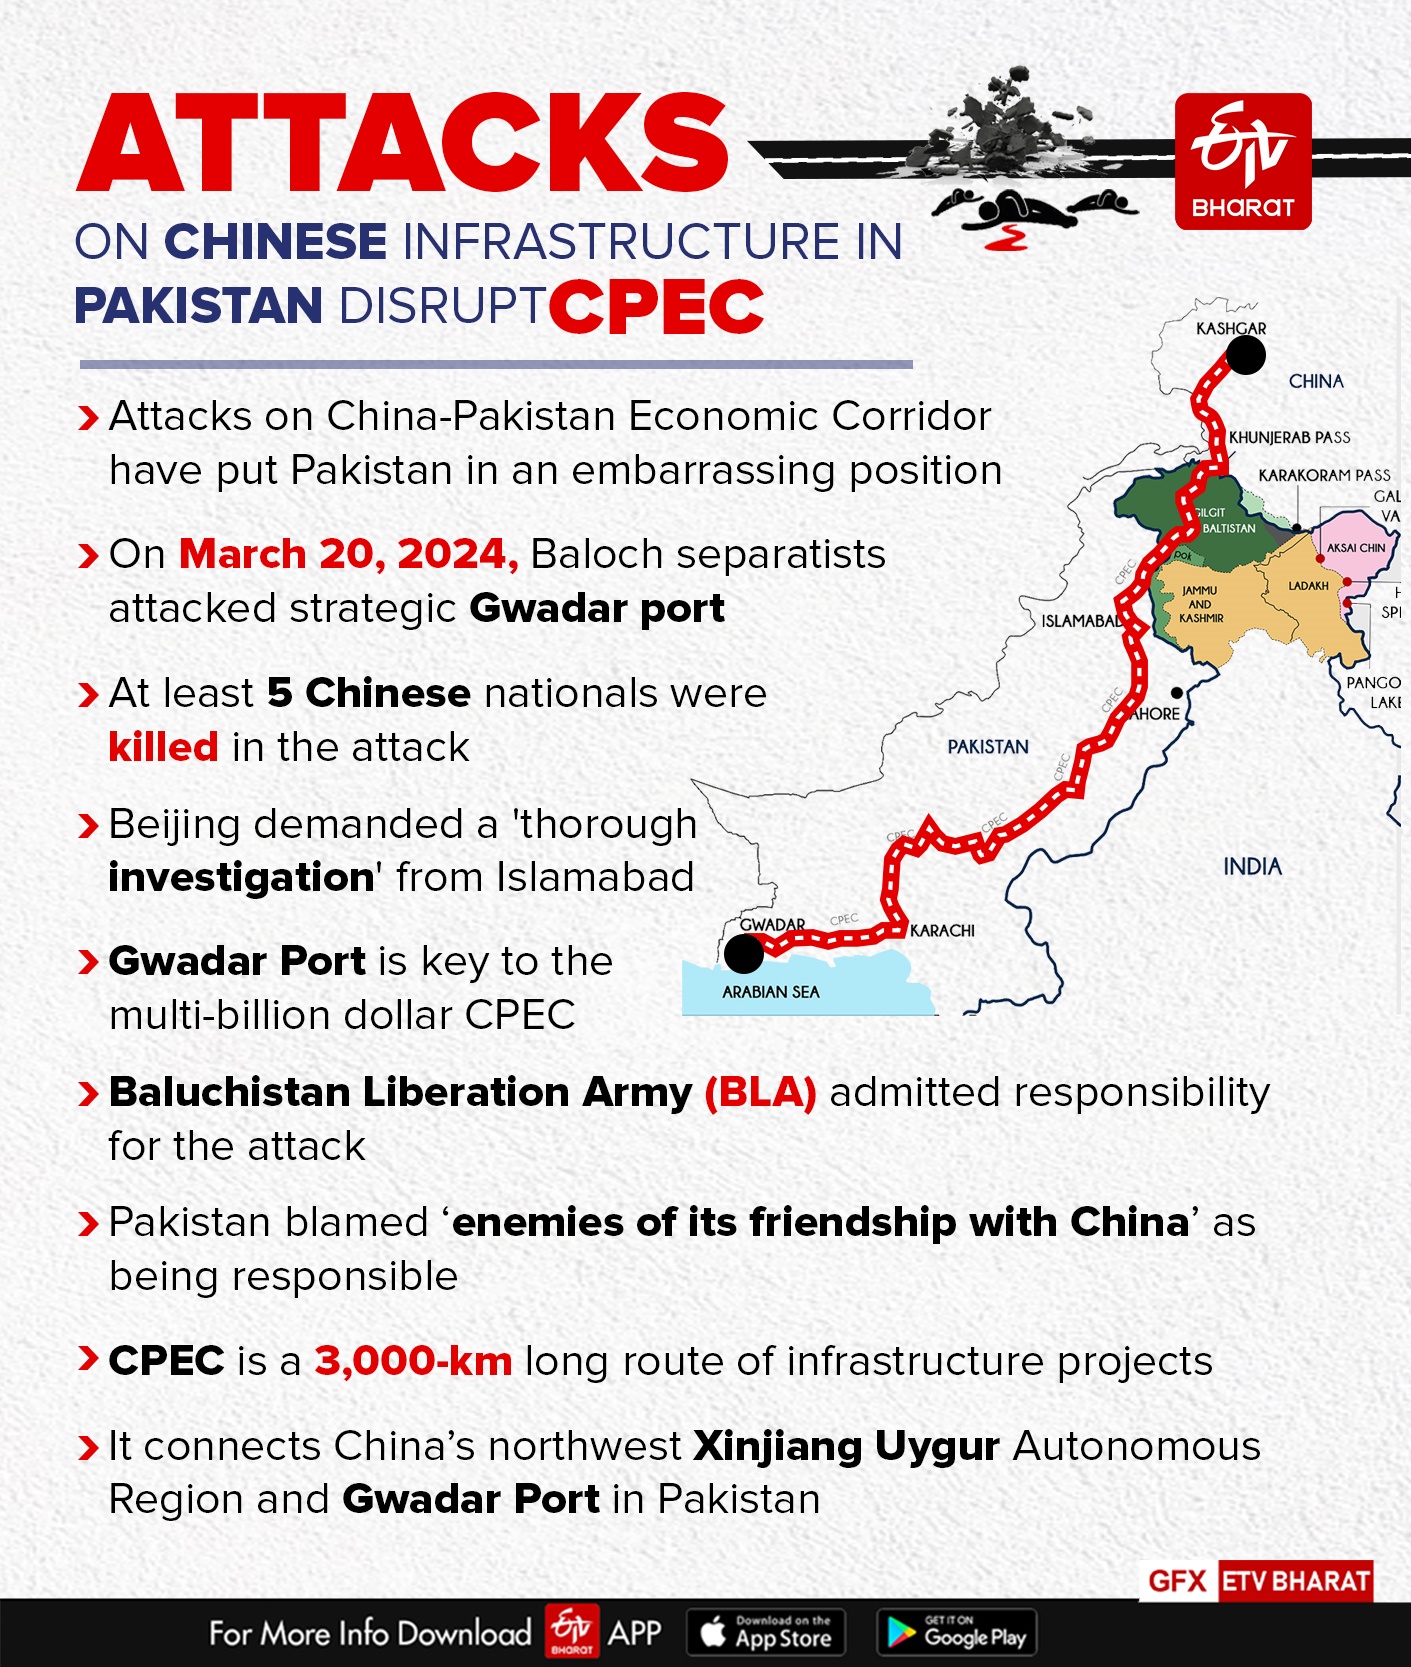 Attacks on the CPEC are an Embarrassment